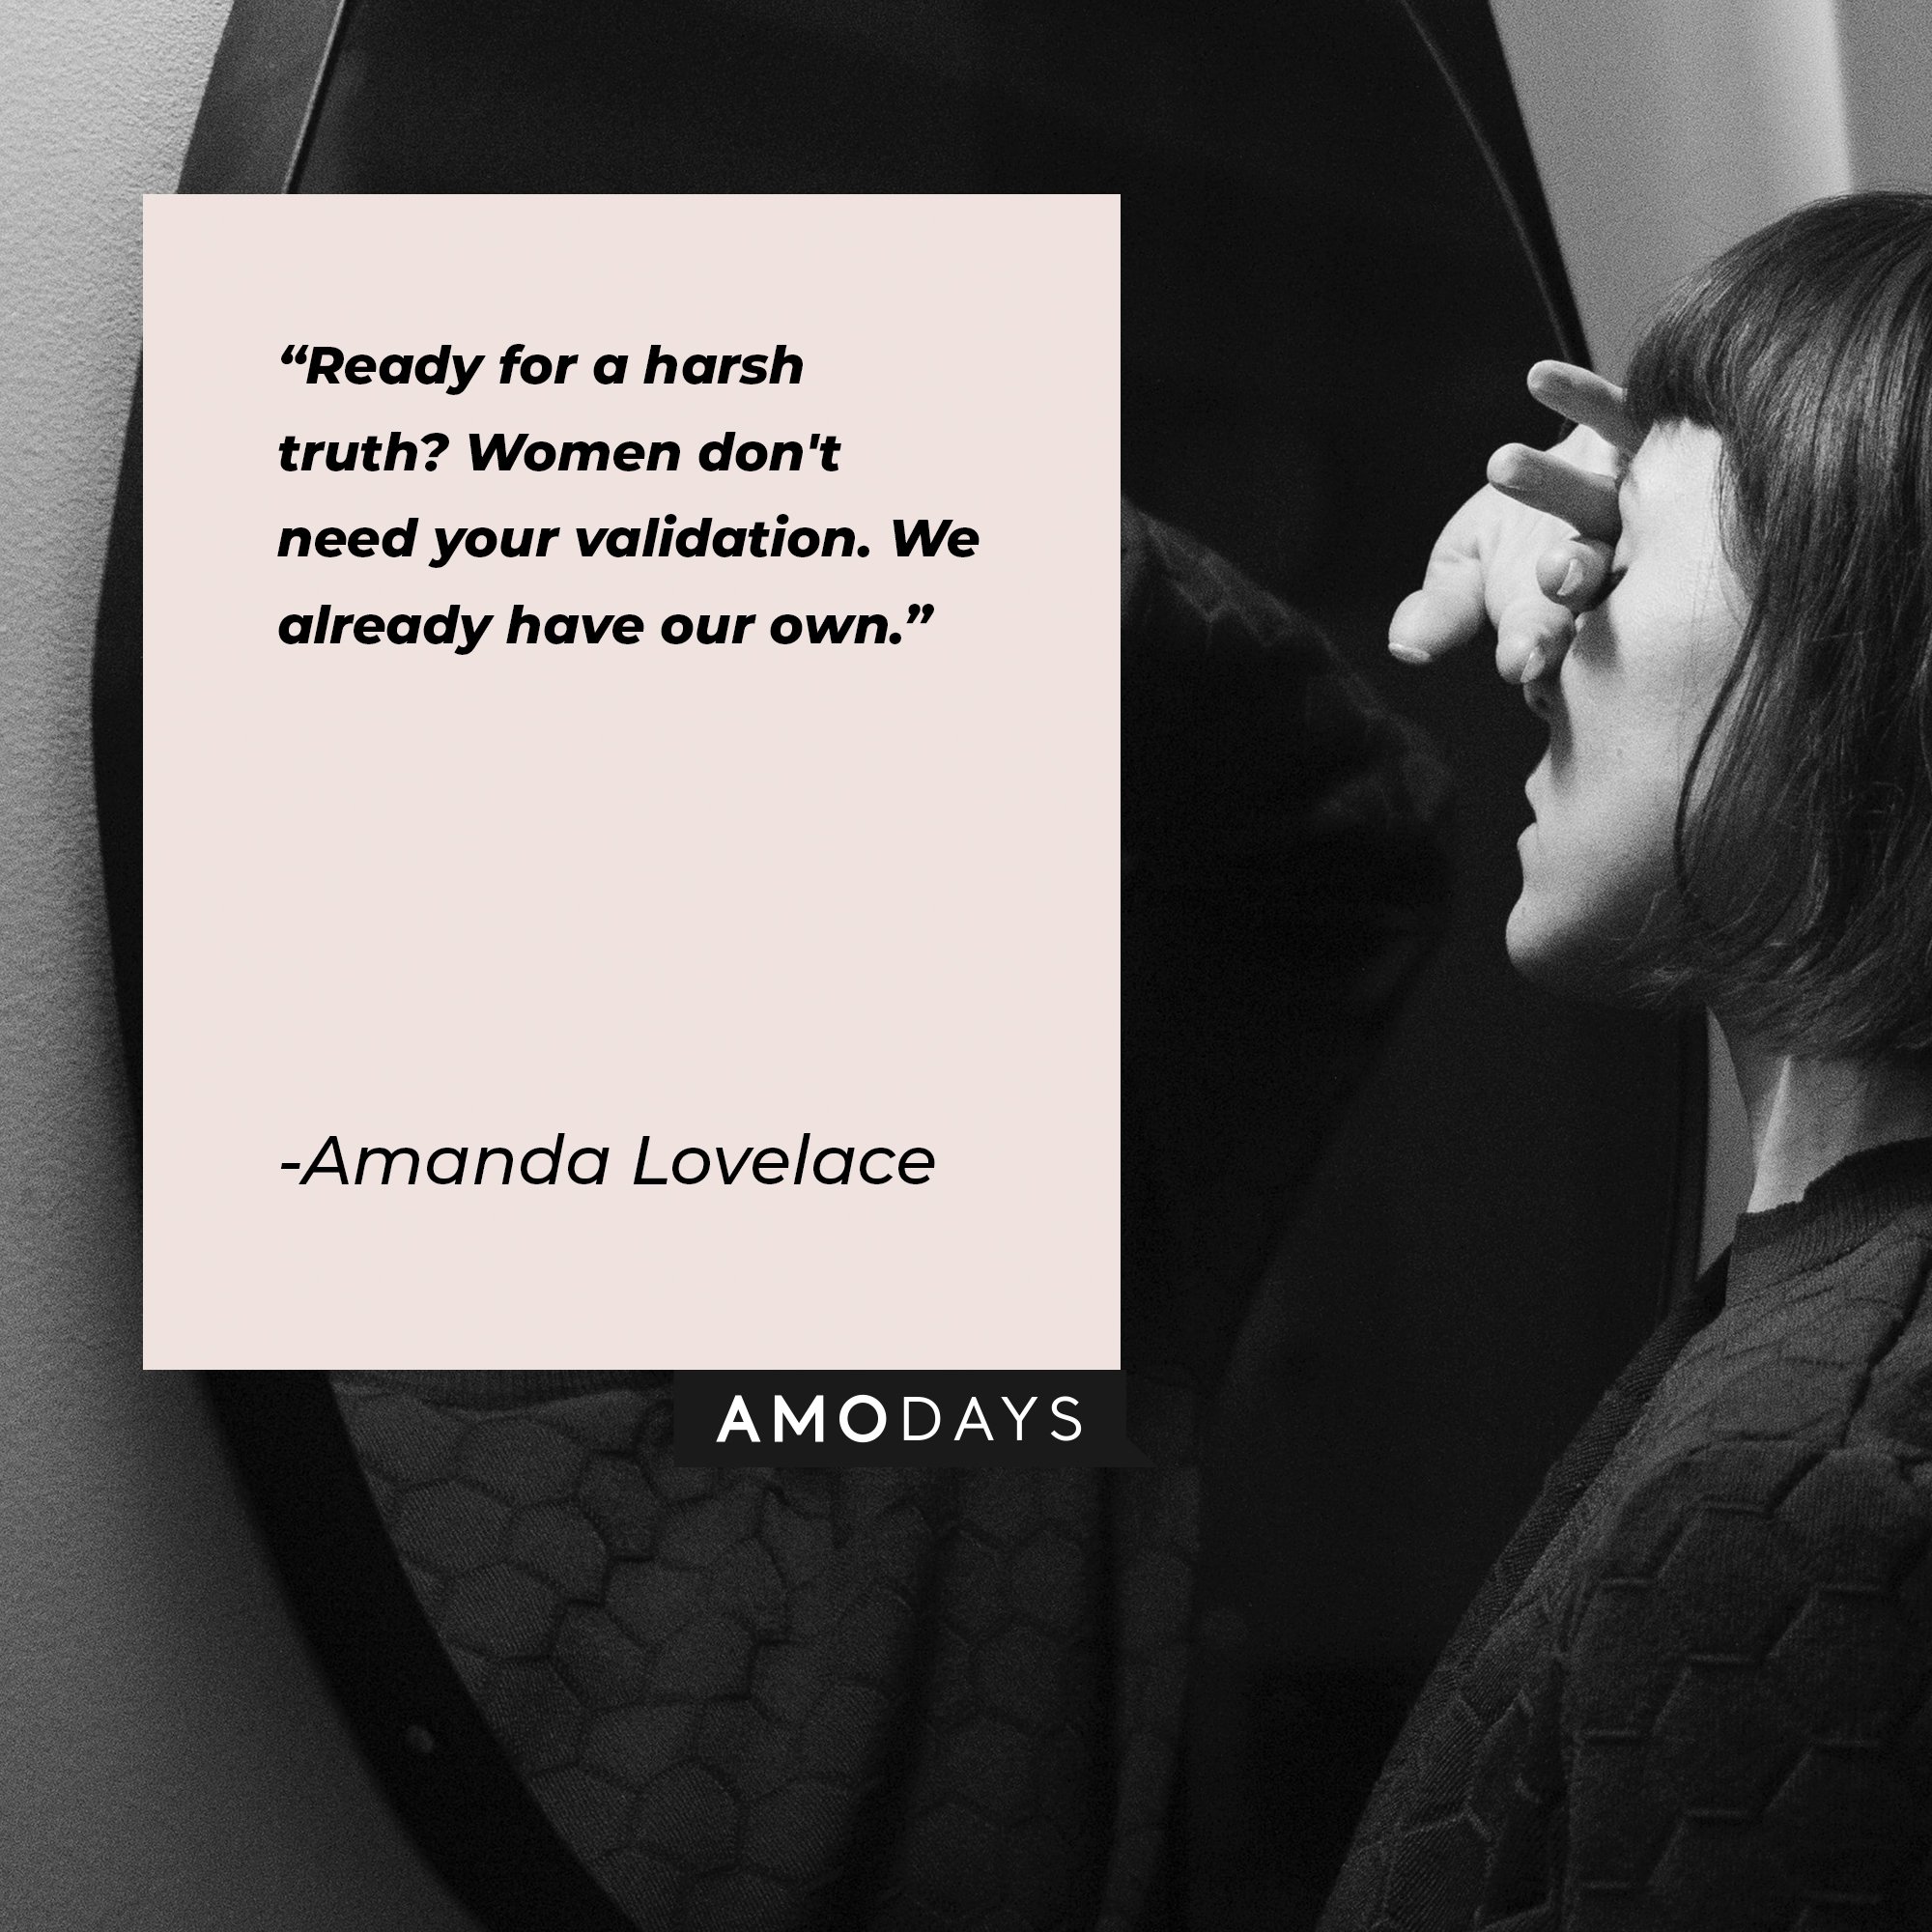 Amanda Lovelace’s quote: "Ready for a harsh truth? Women don't need your validation. We already have our own." | Image: AmoDays 